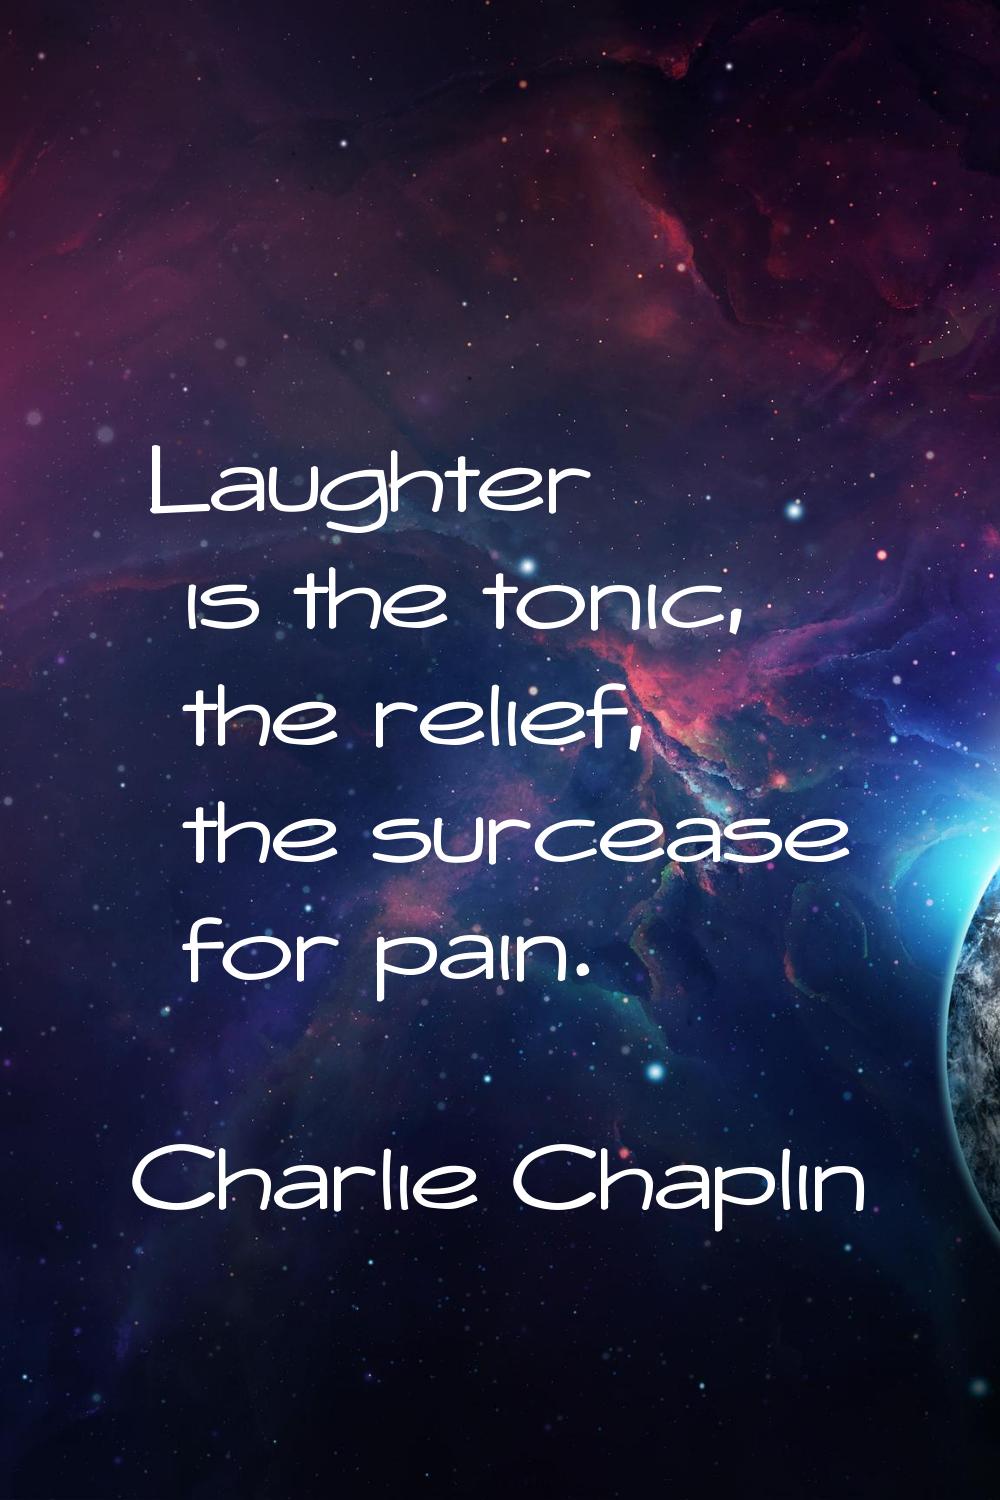 Laughter is the tonic, the relief, the surcease for pain.